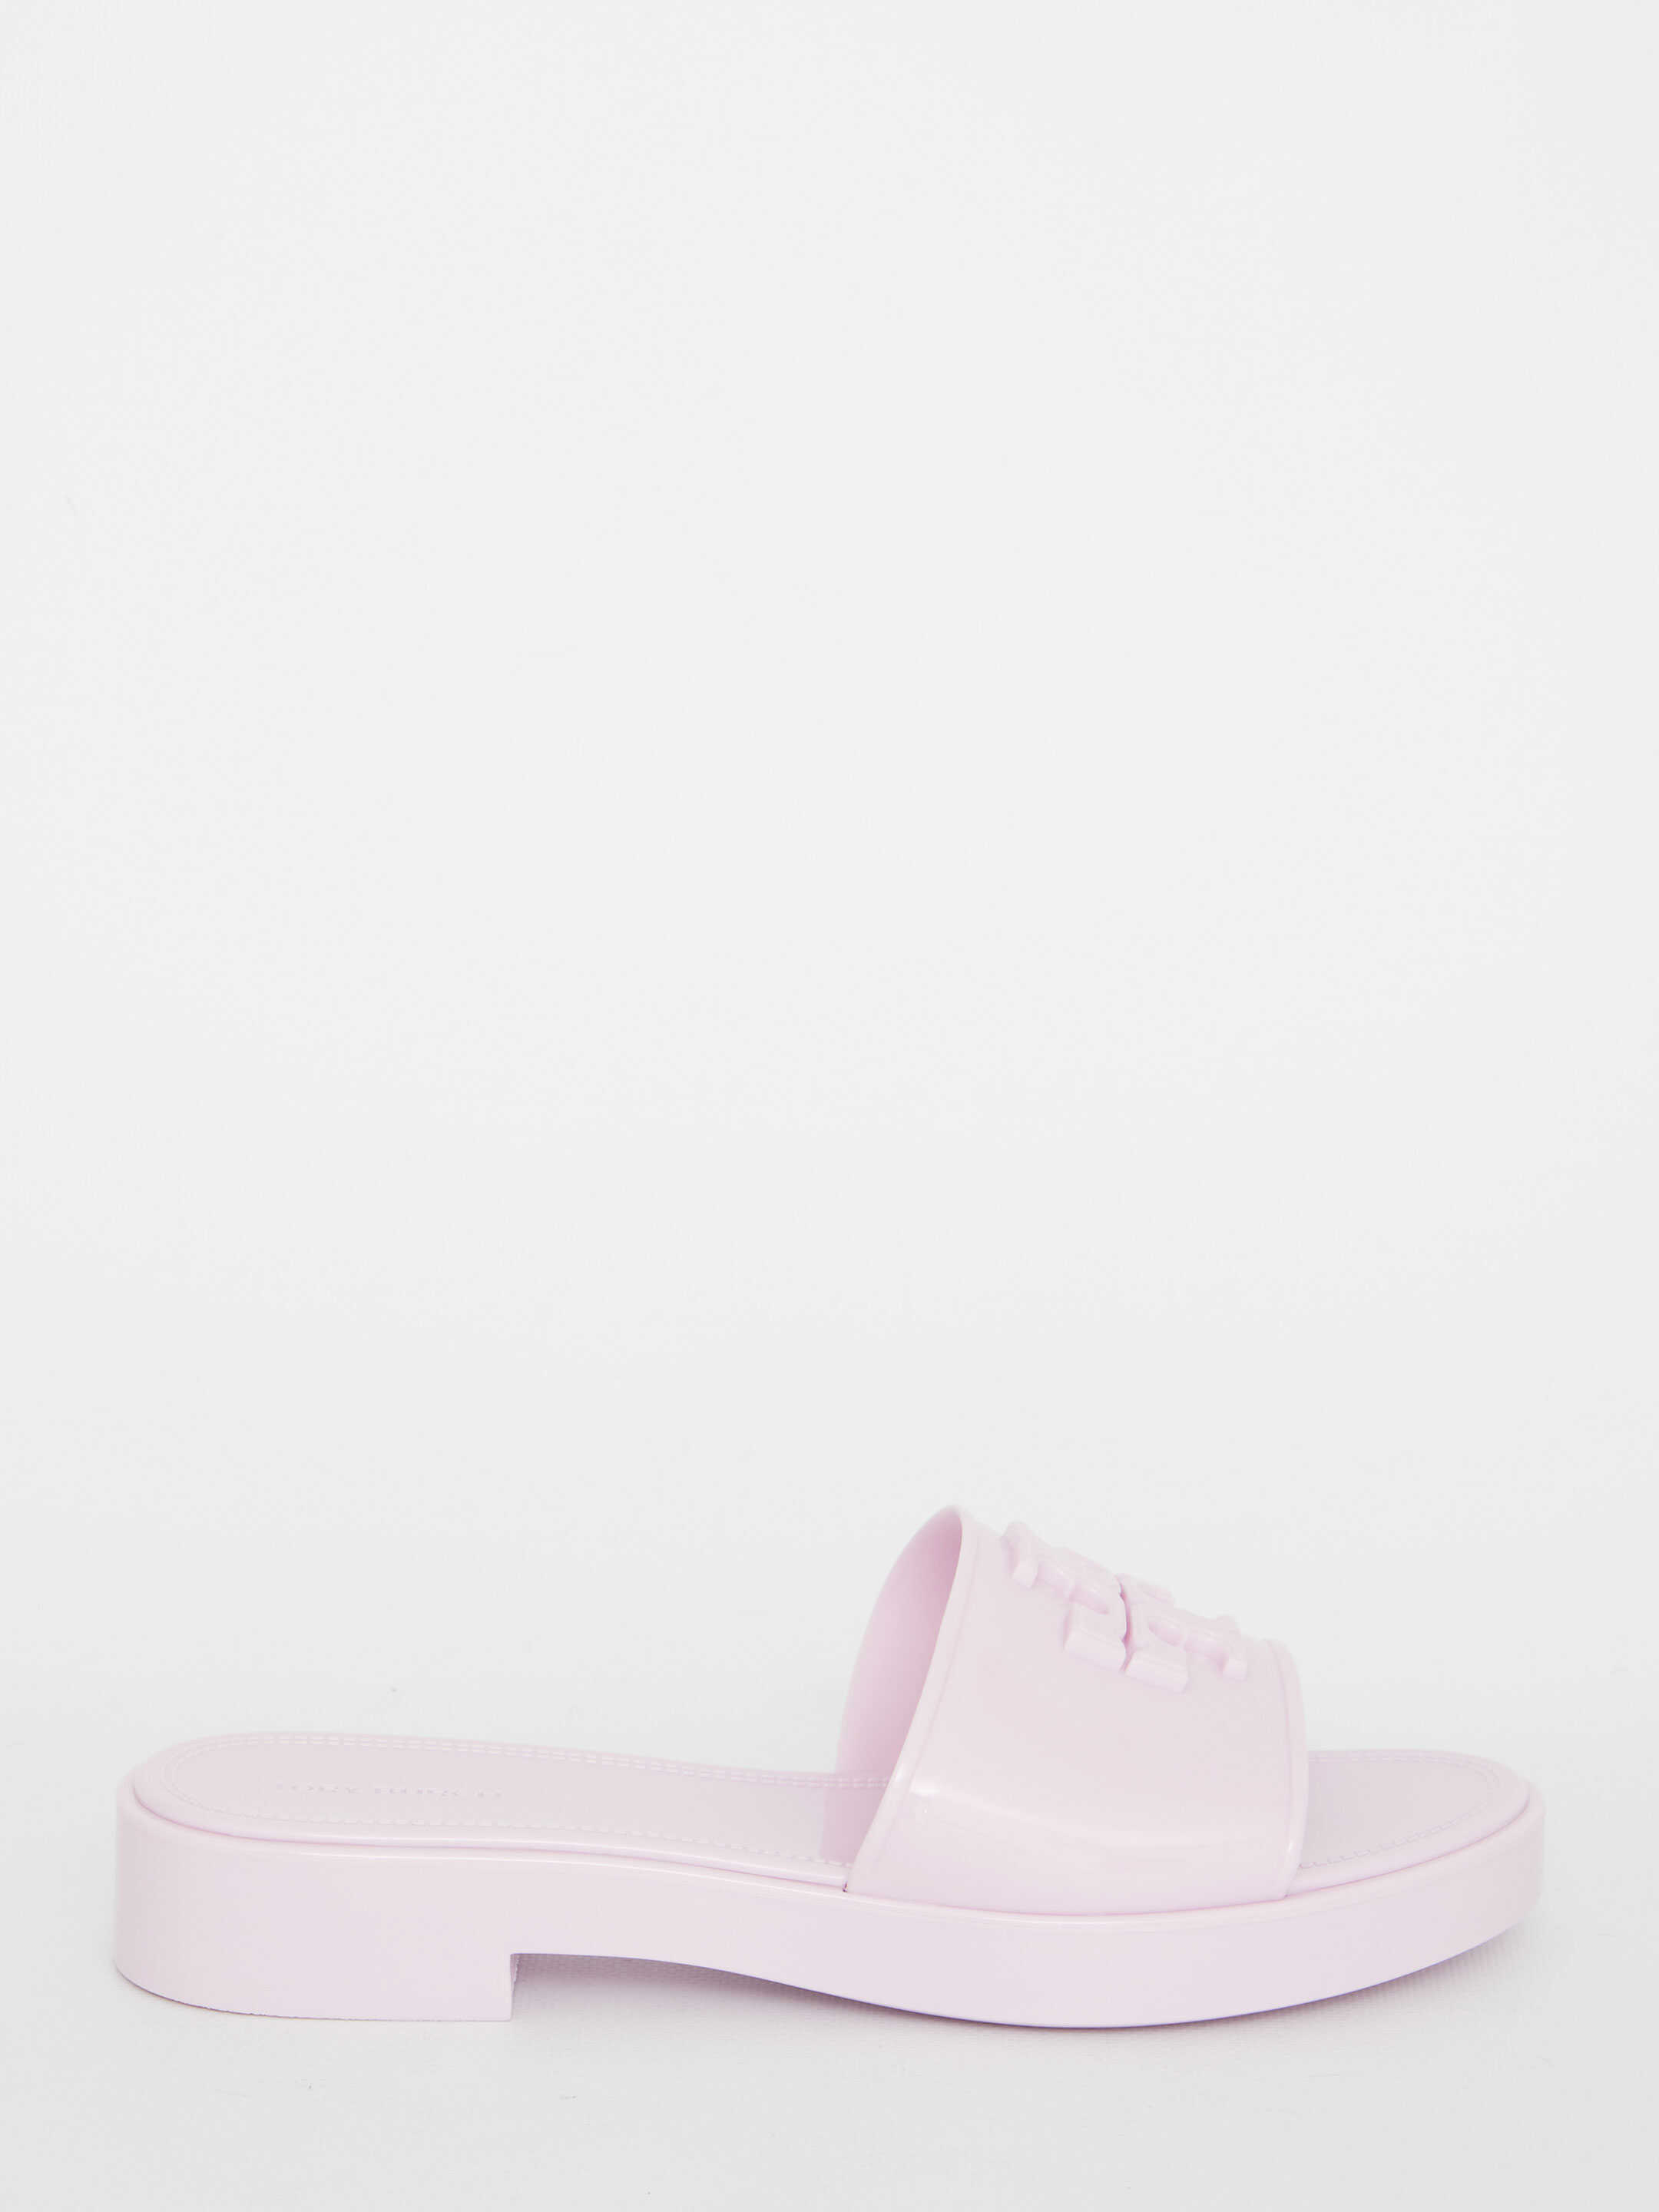 Tory Burch Eleanor Jelly Slide Sandals Pink